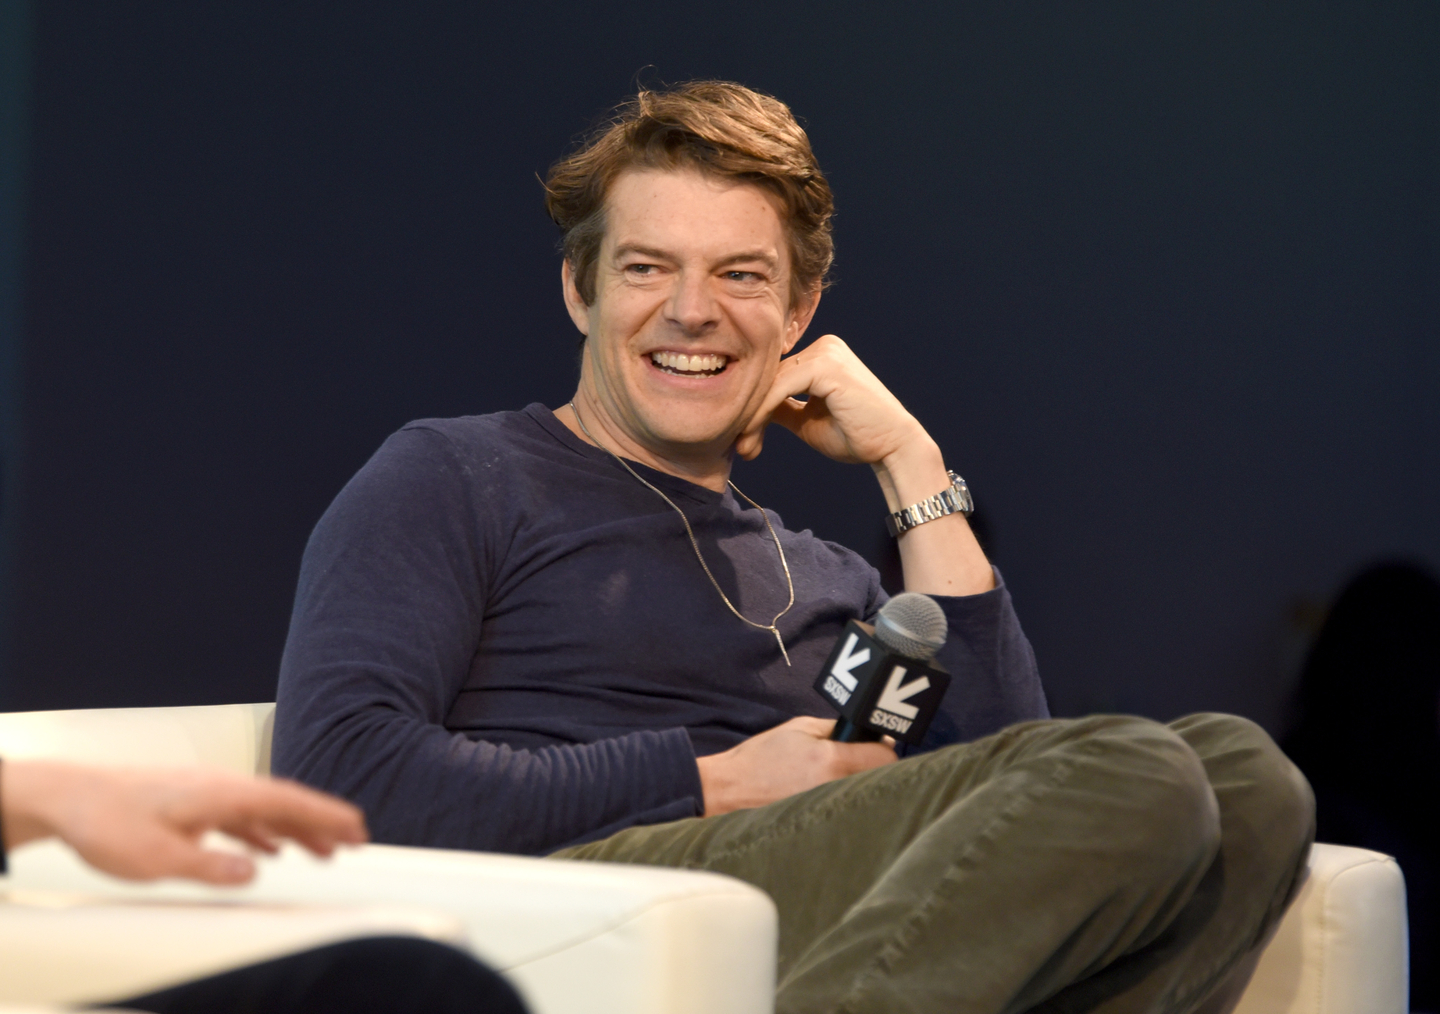 Jason Blum at his Featured Session with Ethan Hawke – Photo by Dave Pedley/Getty Images for SXSW